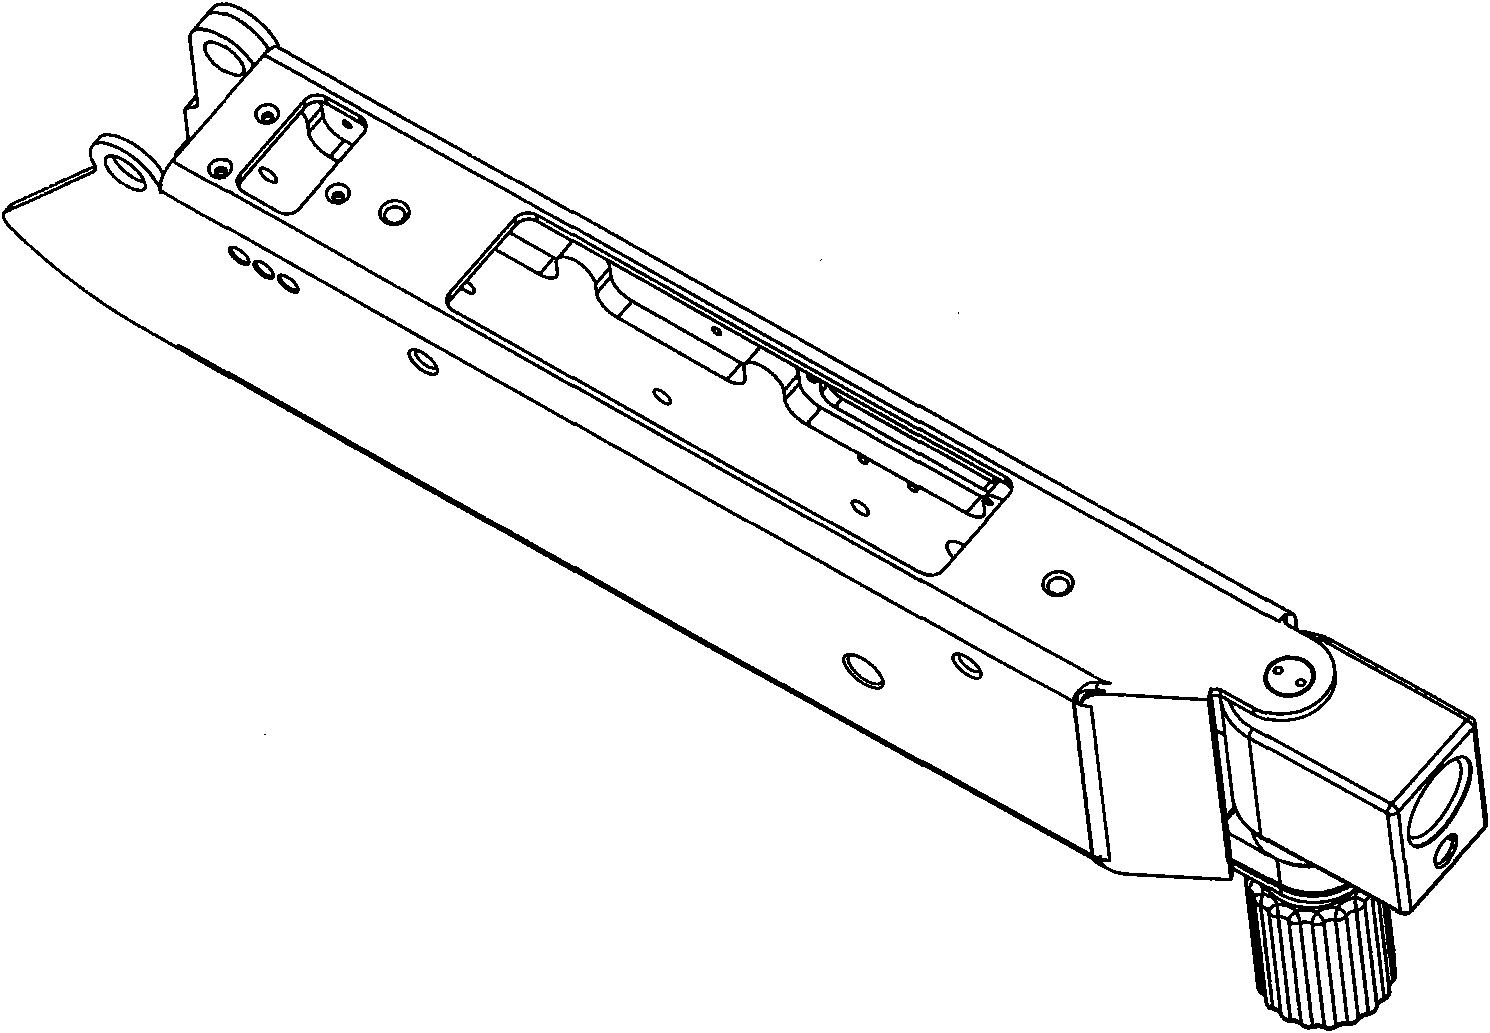 Connecting structure for seat plate and leg plate of operating table